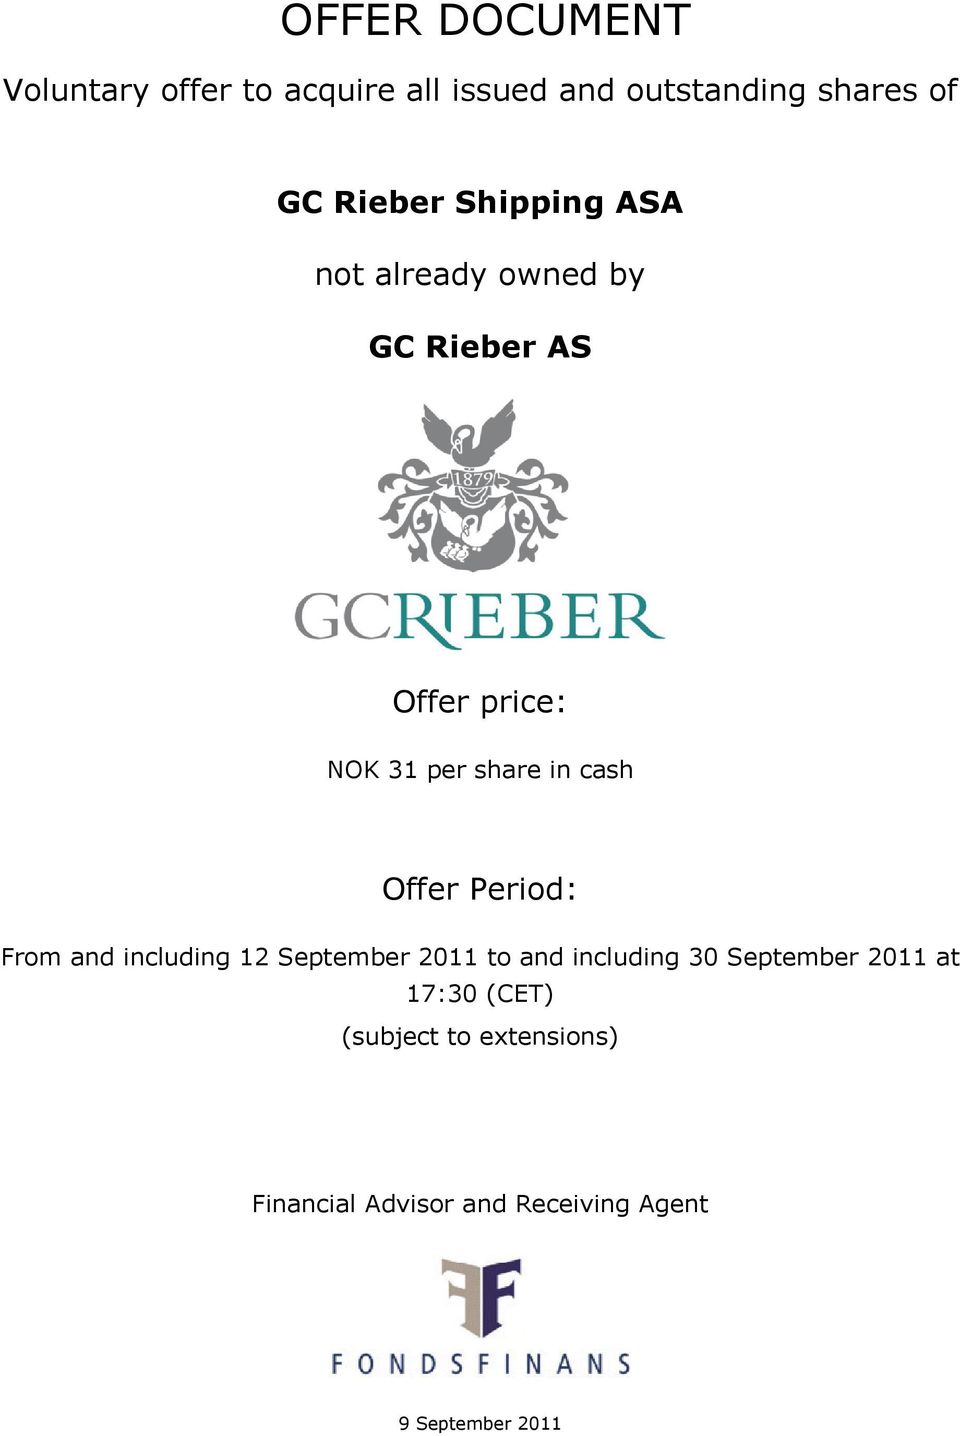 Offer Period: From and including 12 September 2011 to and including 30 September 2011 at